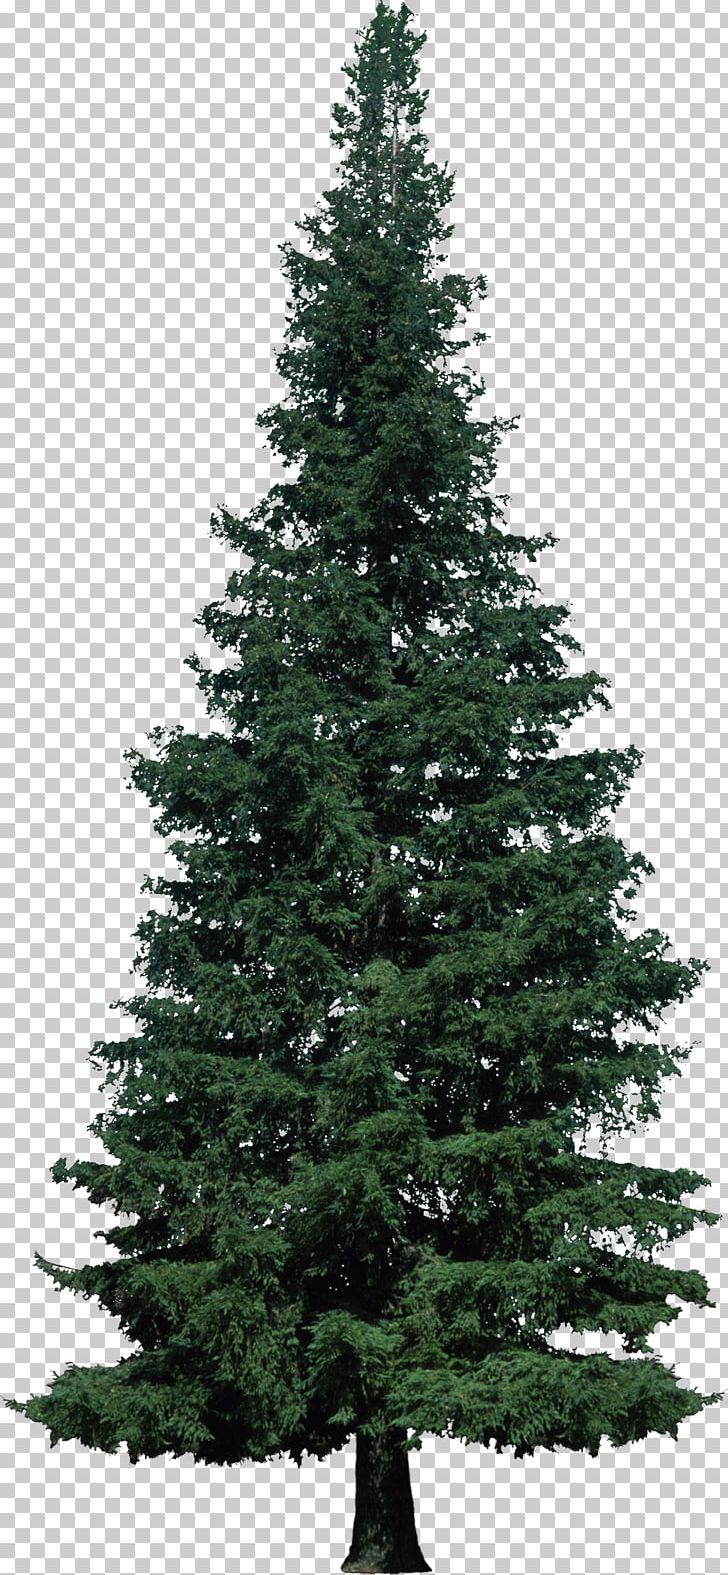 Artificial Christmas Tree Balsam Hill PNG, Clipart, Aluminum Christmas Tree, Artificial Christmas Tree, Balsam Hill, Biome, Bush Free PNG Download